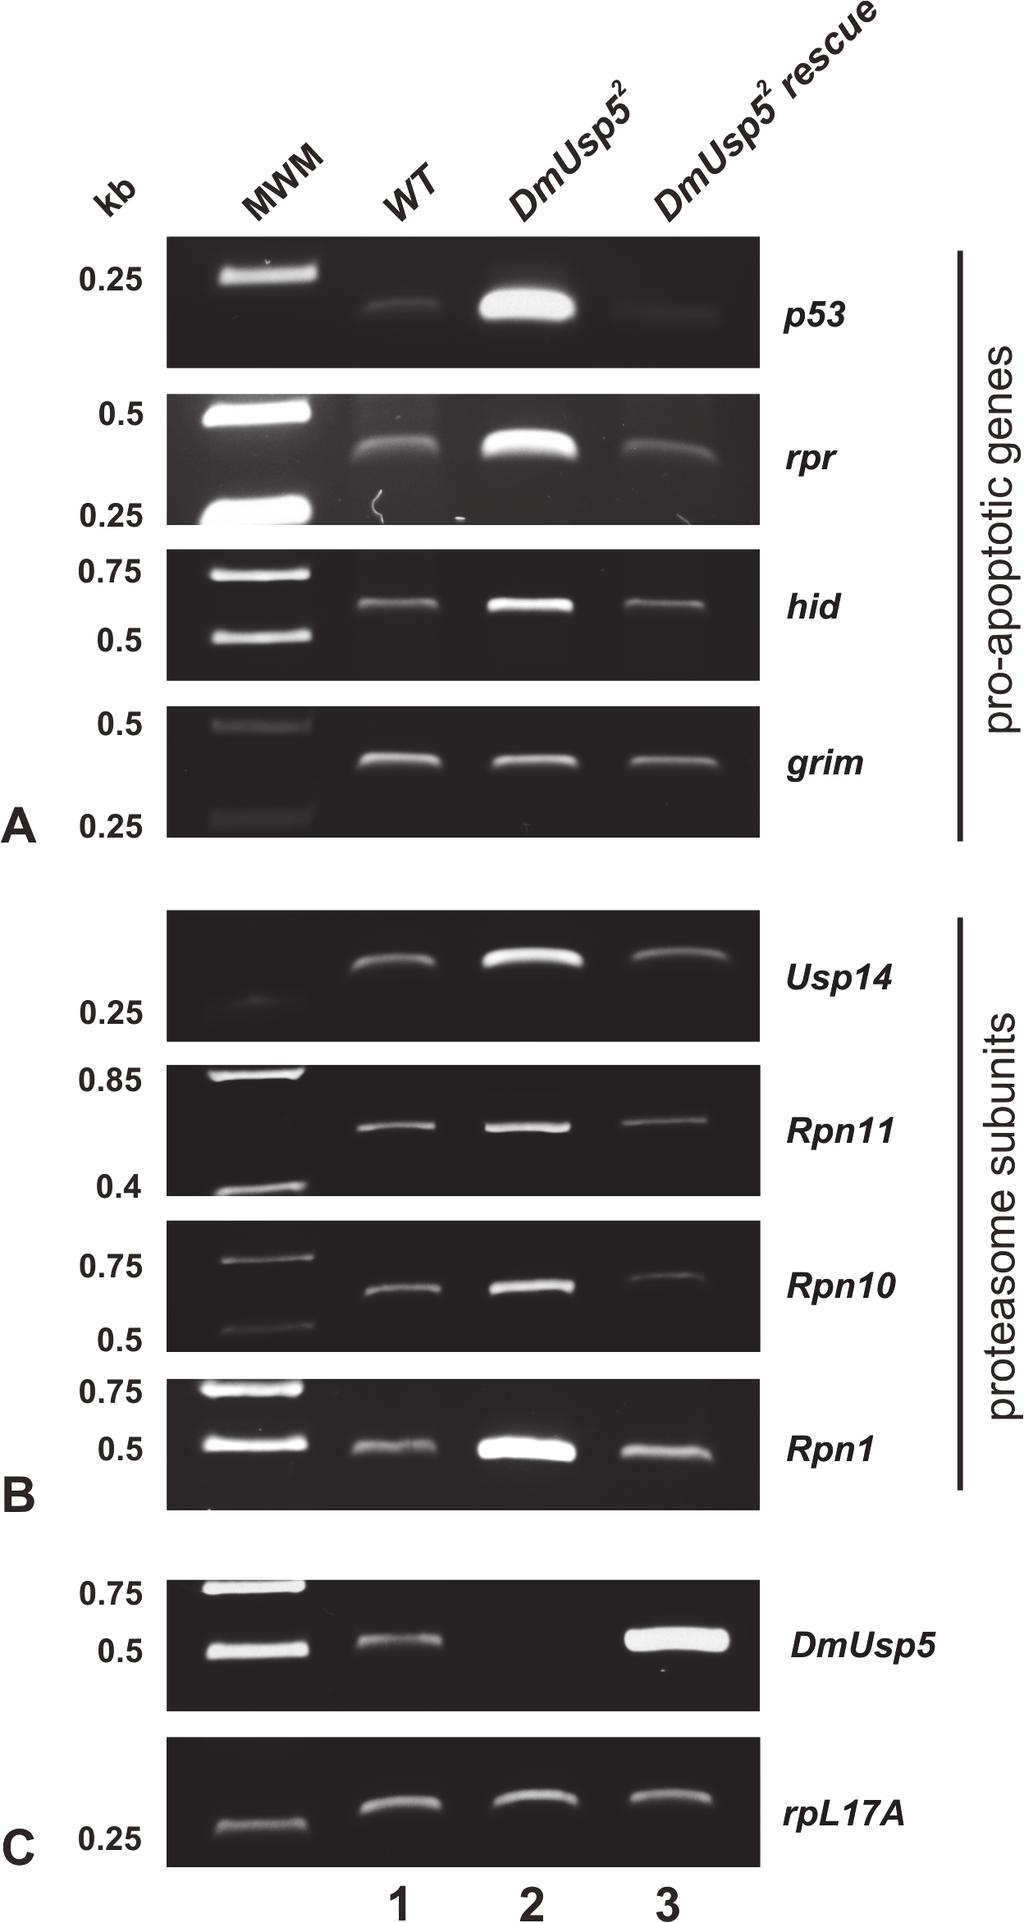 Role of DmUsp5 in Ubiquitin Equilibrium Fig 5. Overexpression of pro-apoptotic genes and proteasome subunits in the DmUsp5 mutant.